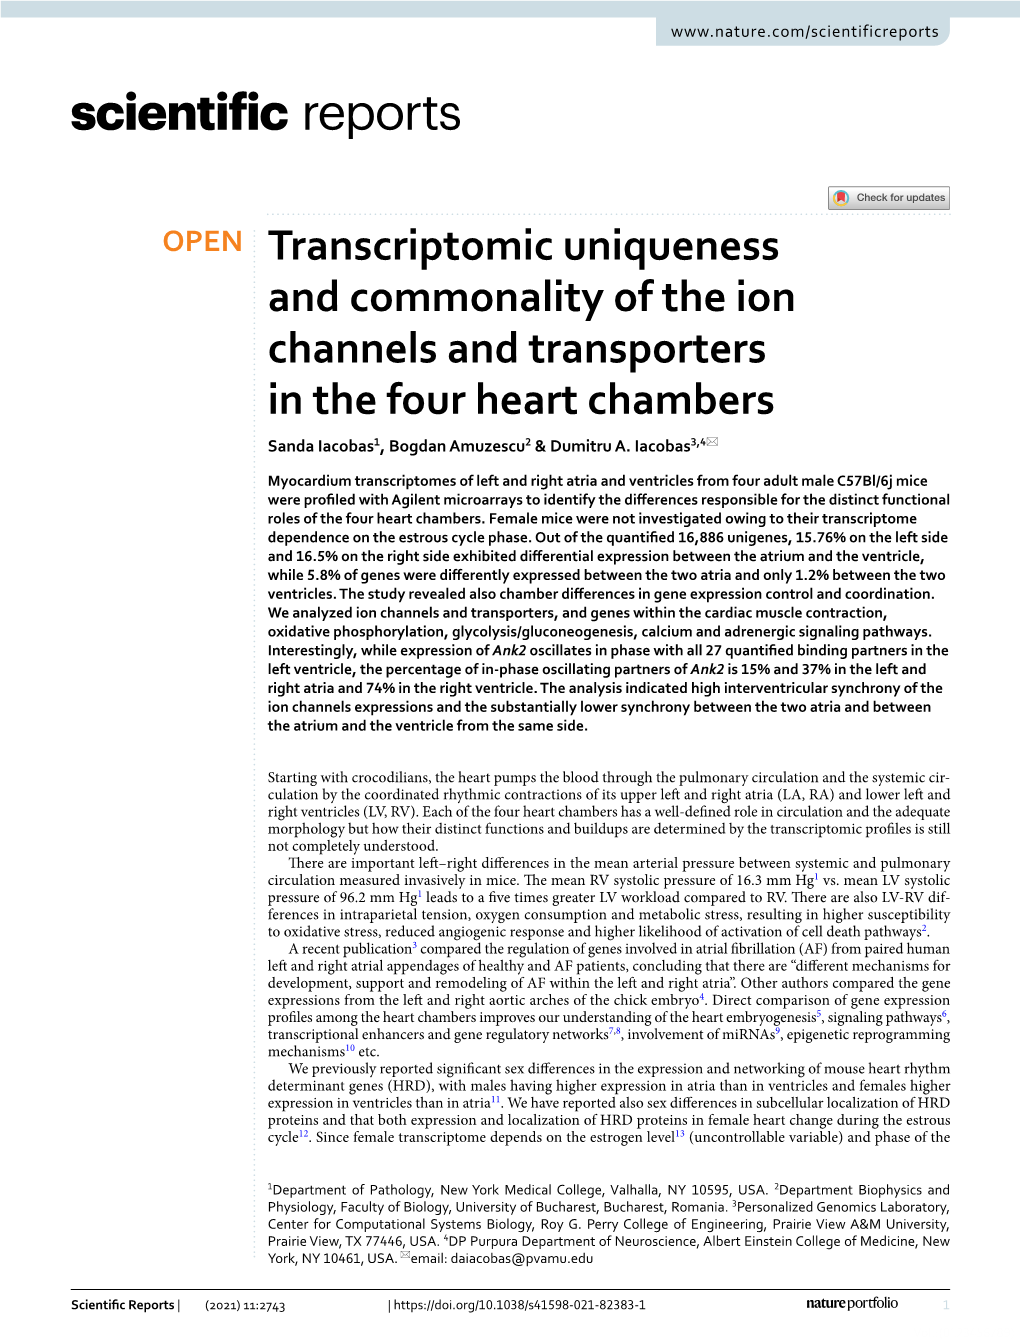 Transcriptomic Uniqueness and Commonality of the Ion Channels and Transporters in the Four Heart Chambers Sanda Iacobas1, Bogdan Amuzescu2 & Dumitru A